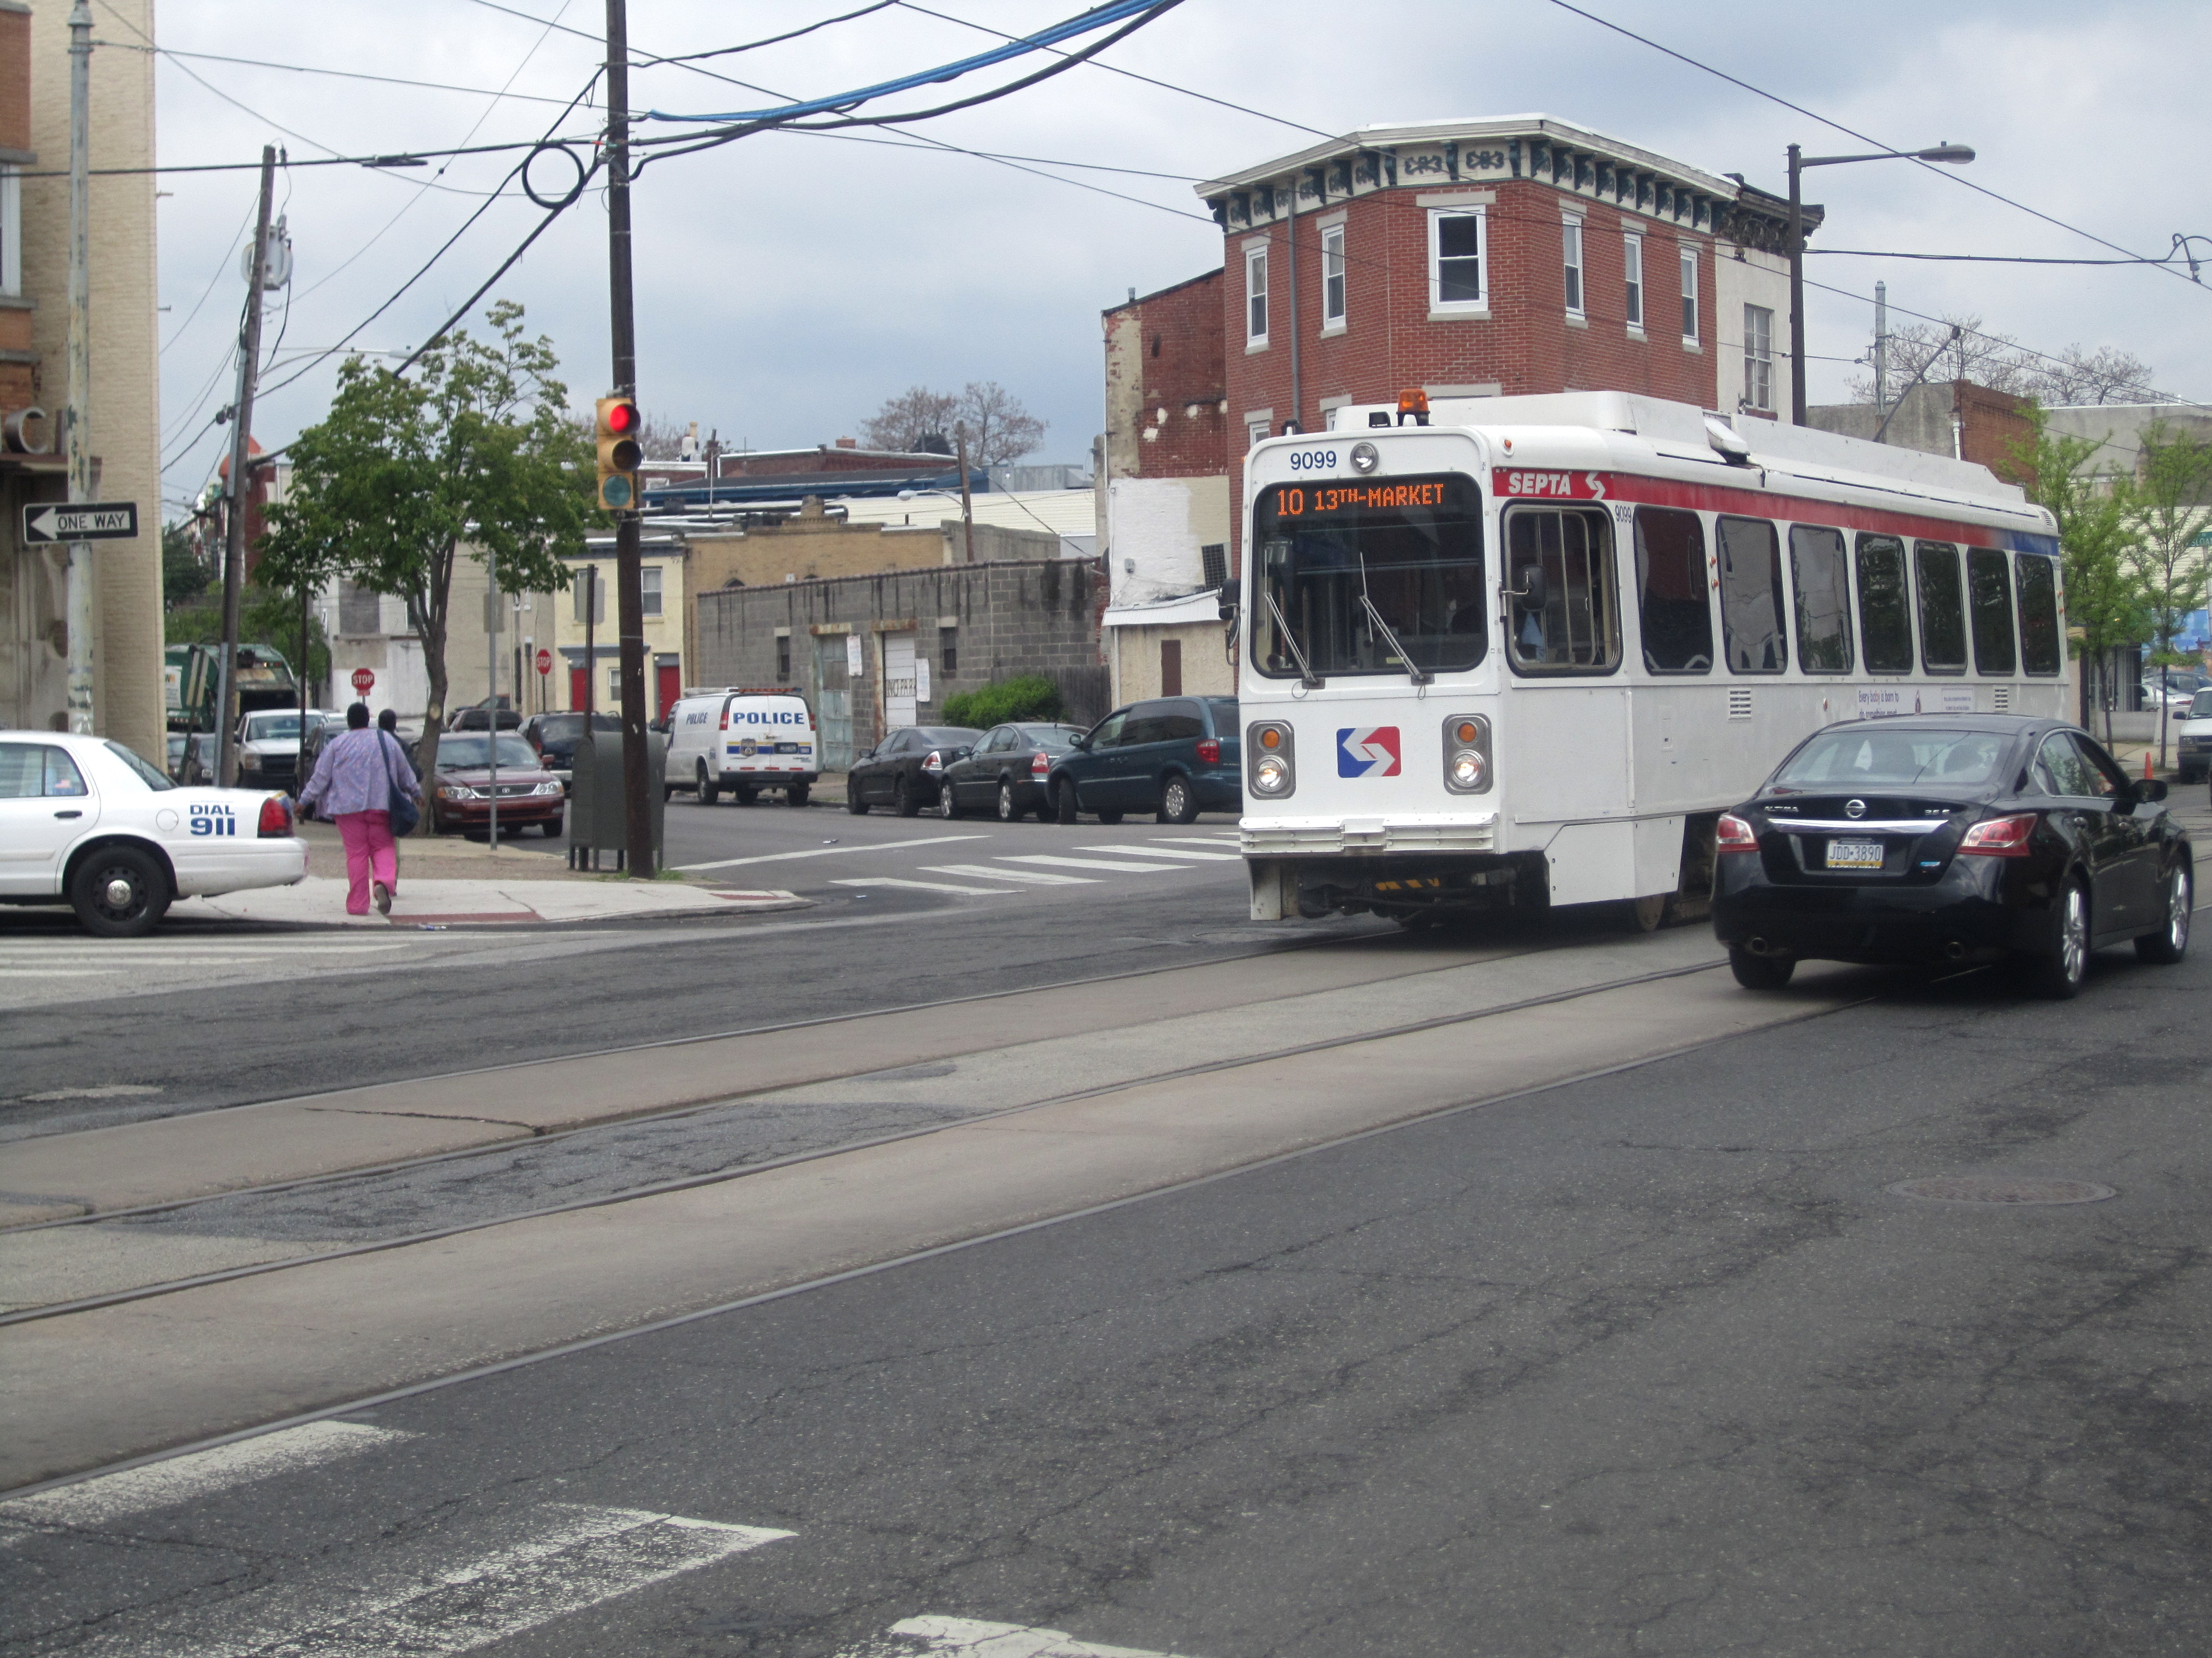 This summer SEPTA will renew and repave portions of the Route 10 trolley tracks